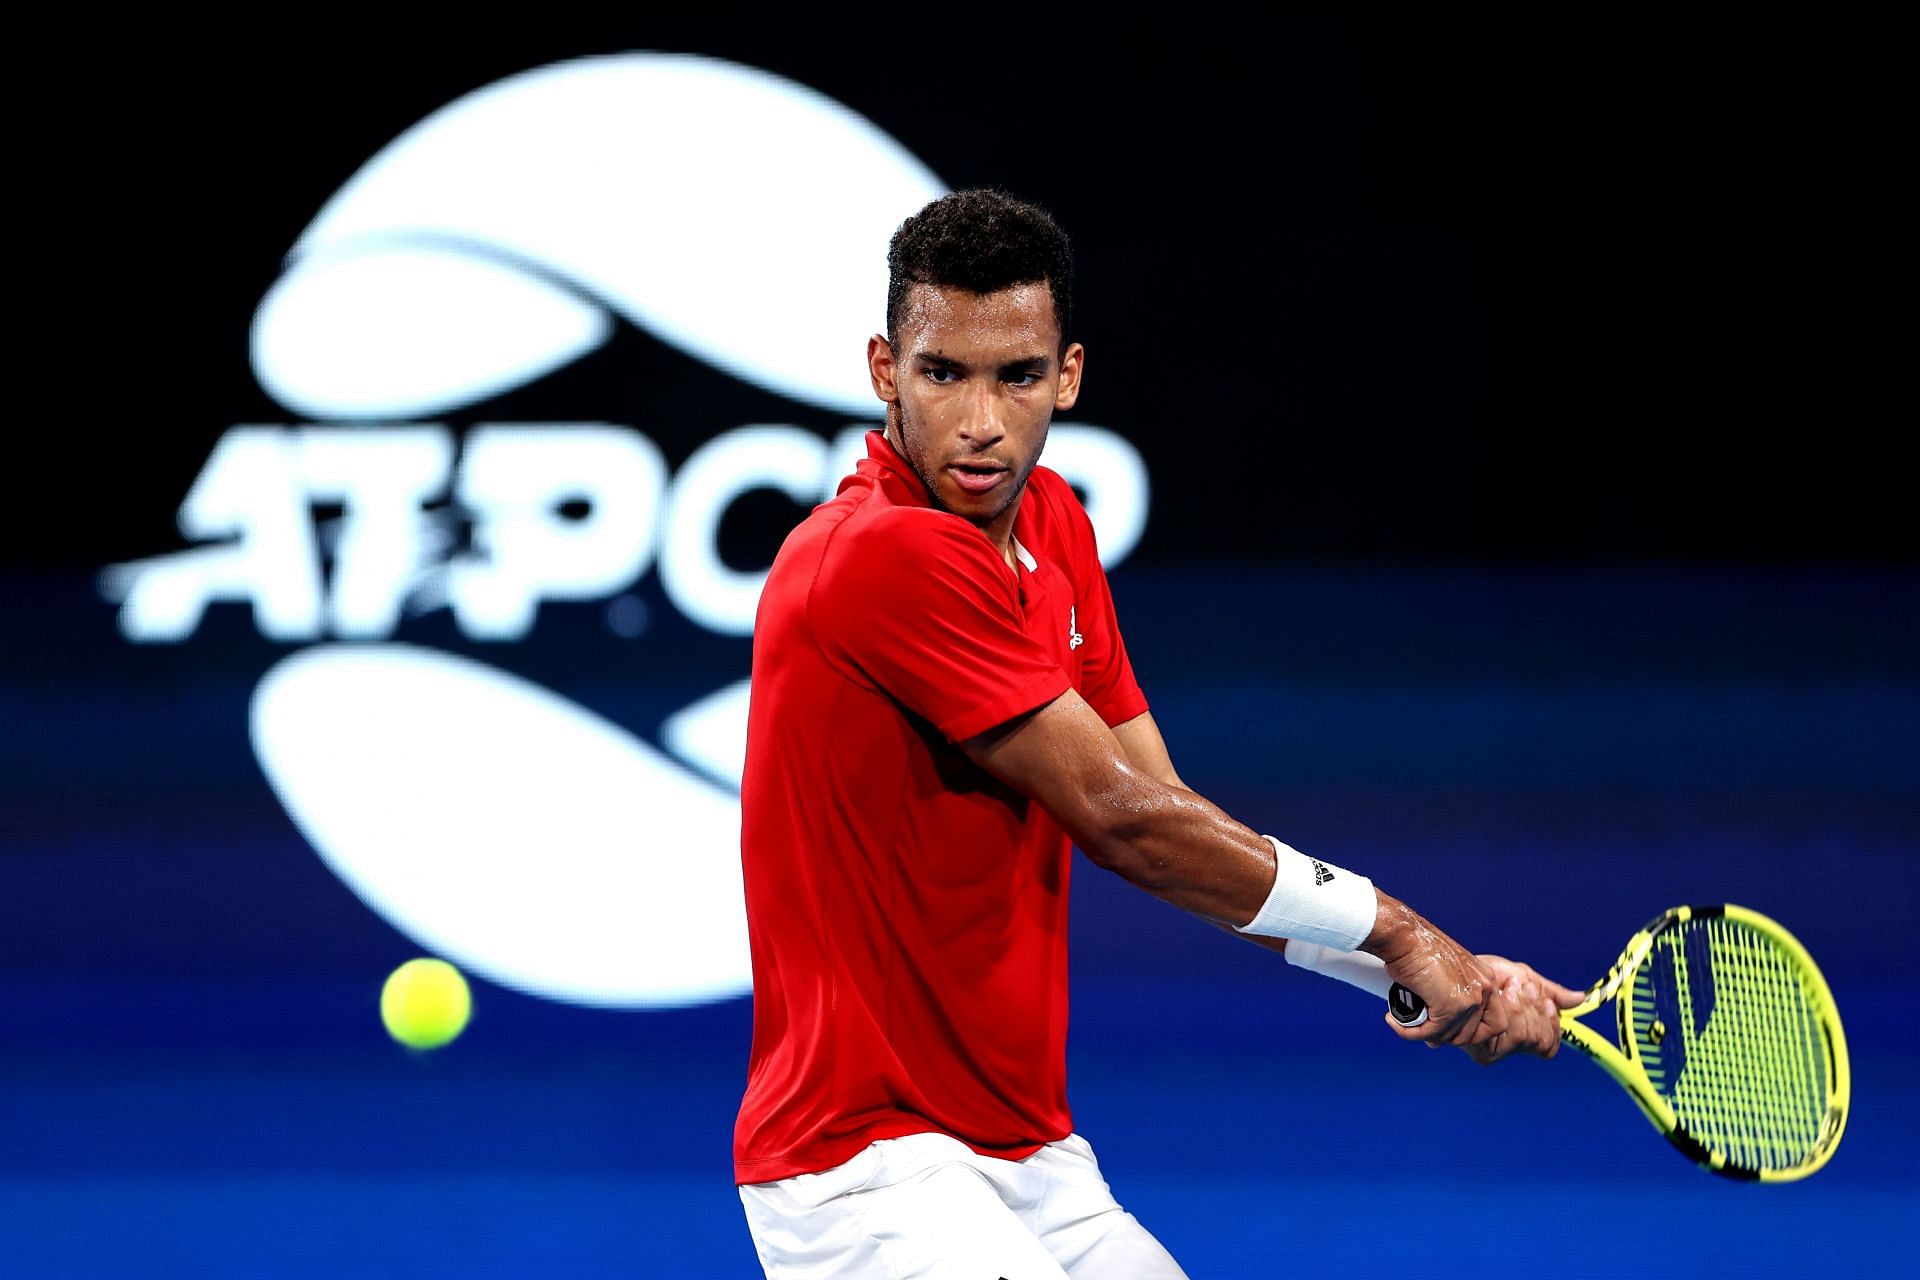 Felix Auger-Aliassime at the 2022 ATP Cup